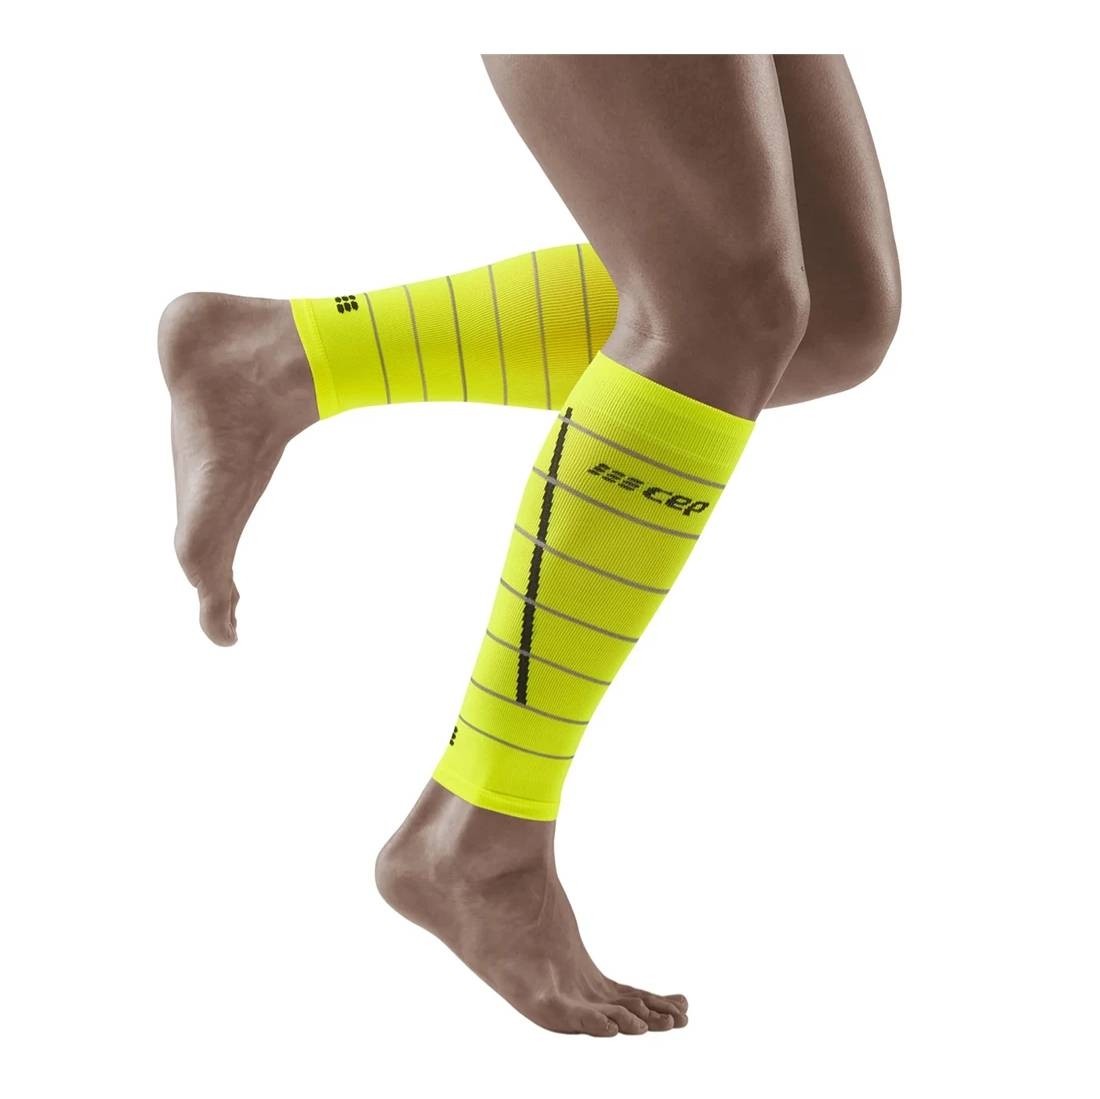 CEP ULTRALIGHT COMPRESSION CALF SLEEVES - Leg sleeves - carbon